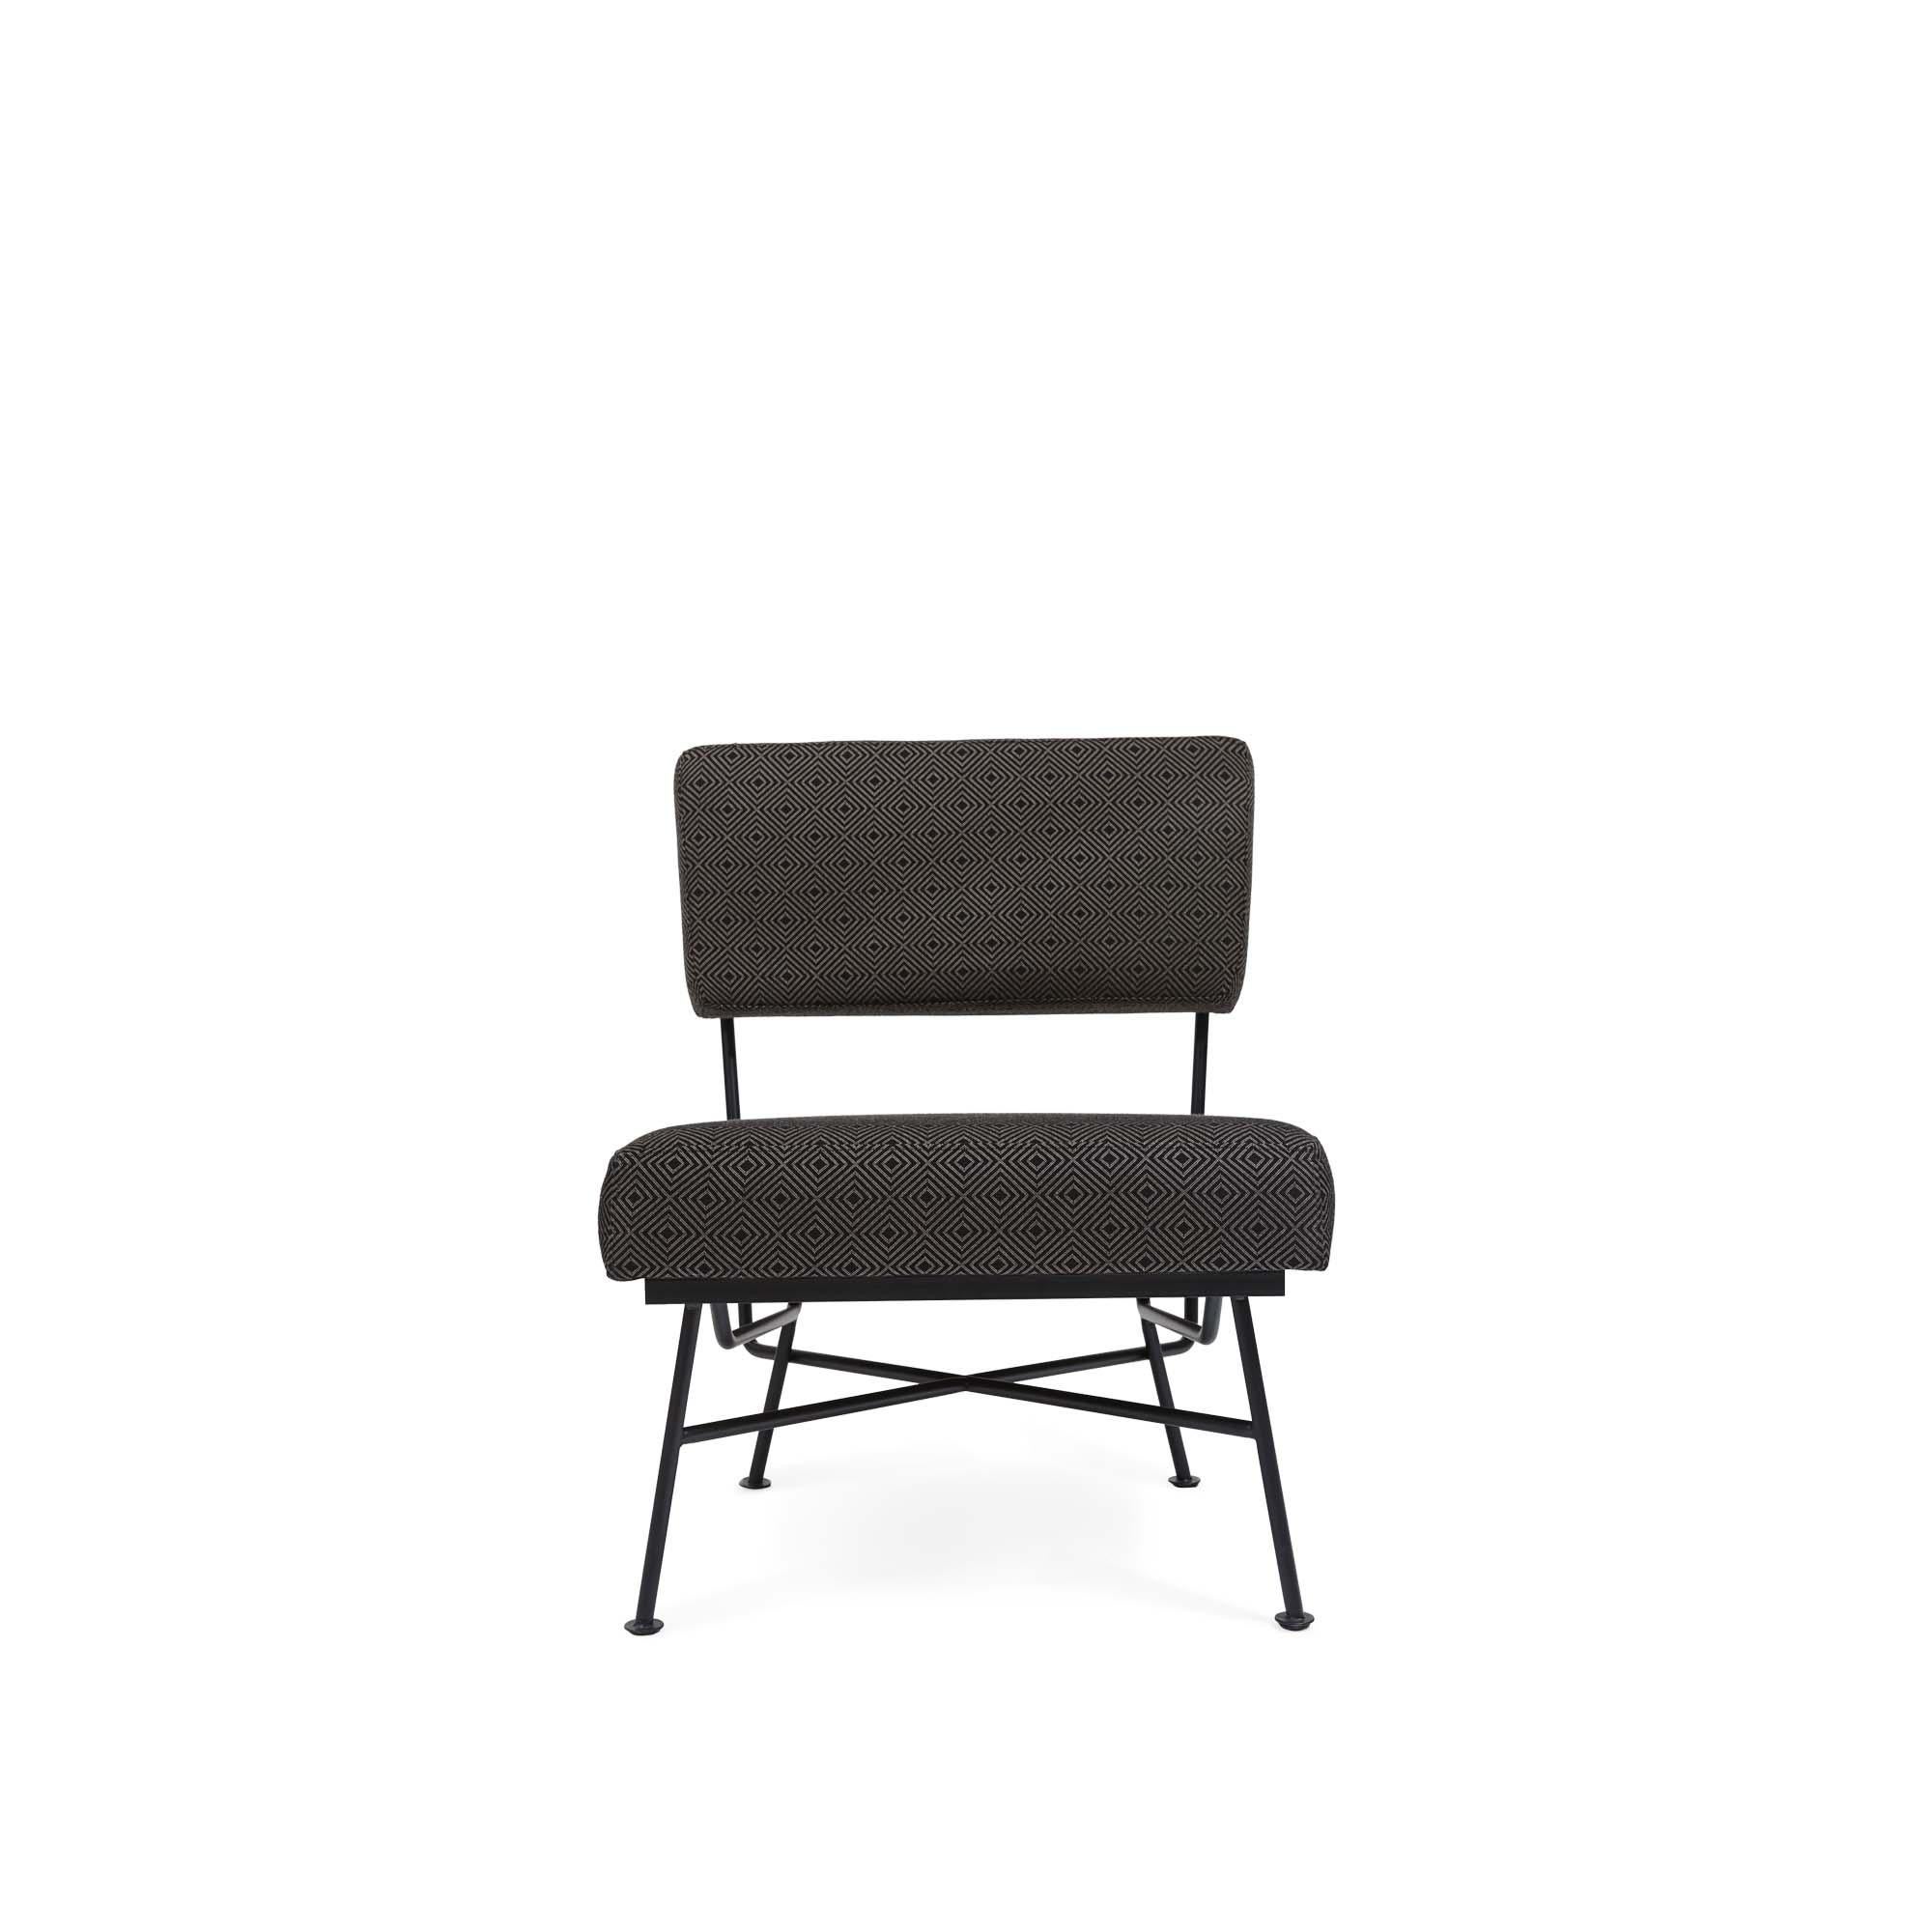 The Montrose lounge chair features a powder-coated steel frame and attached cushions that is suitable for indoor or outdoor use. The Montrose ottoman is available separately to match. For indoor or outdoor use, but not intended for use in wet